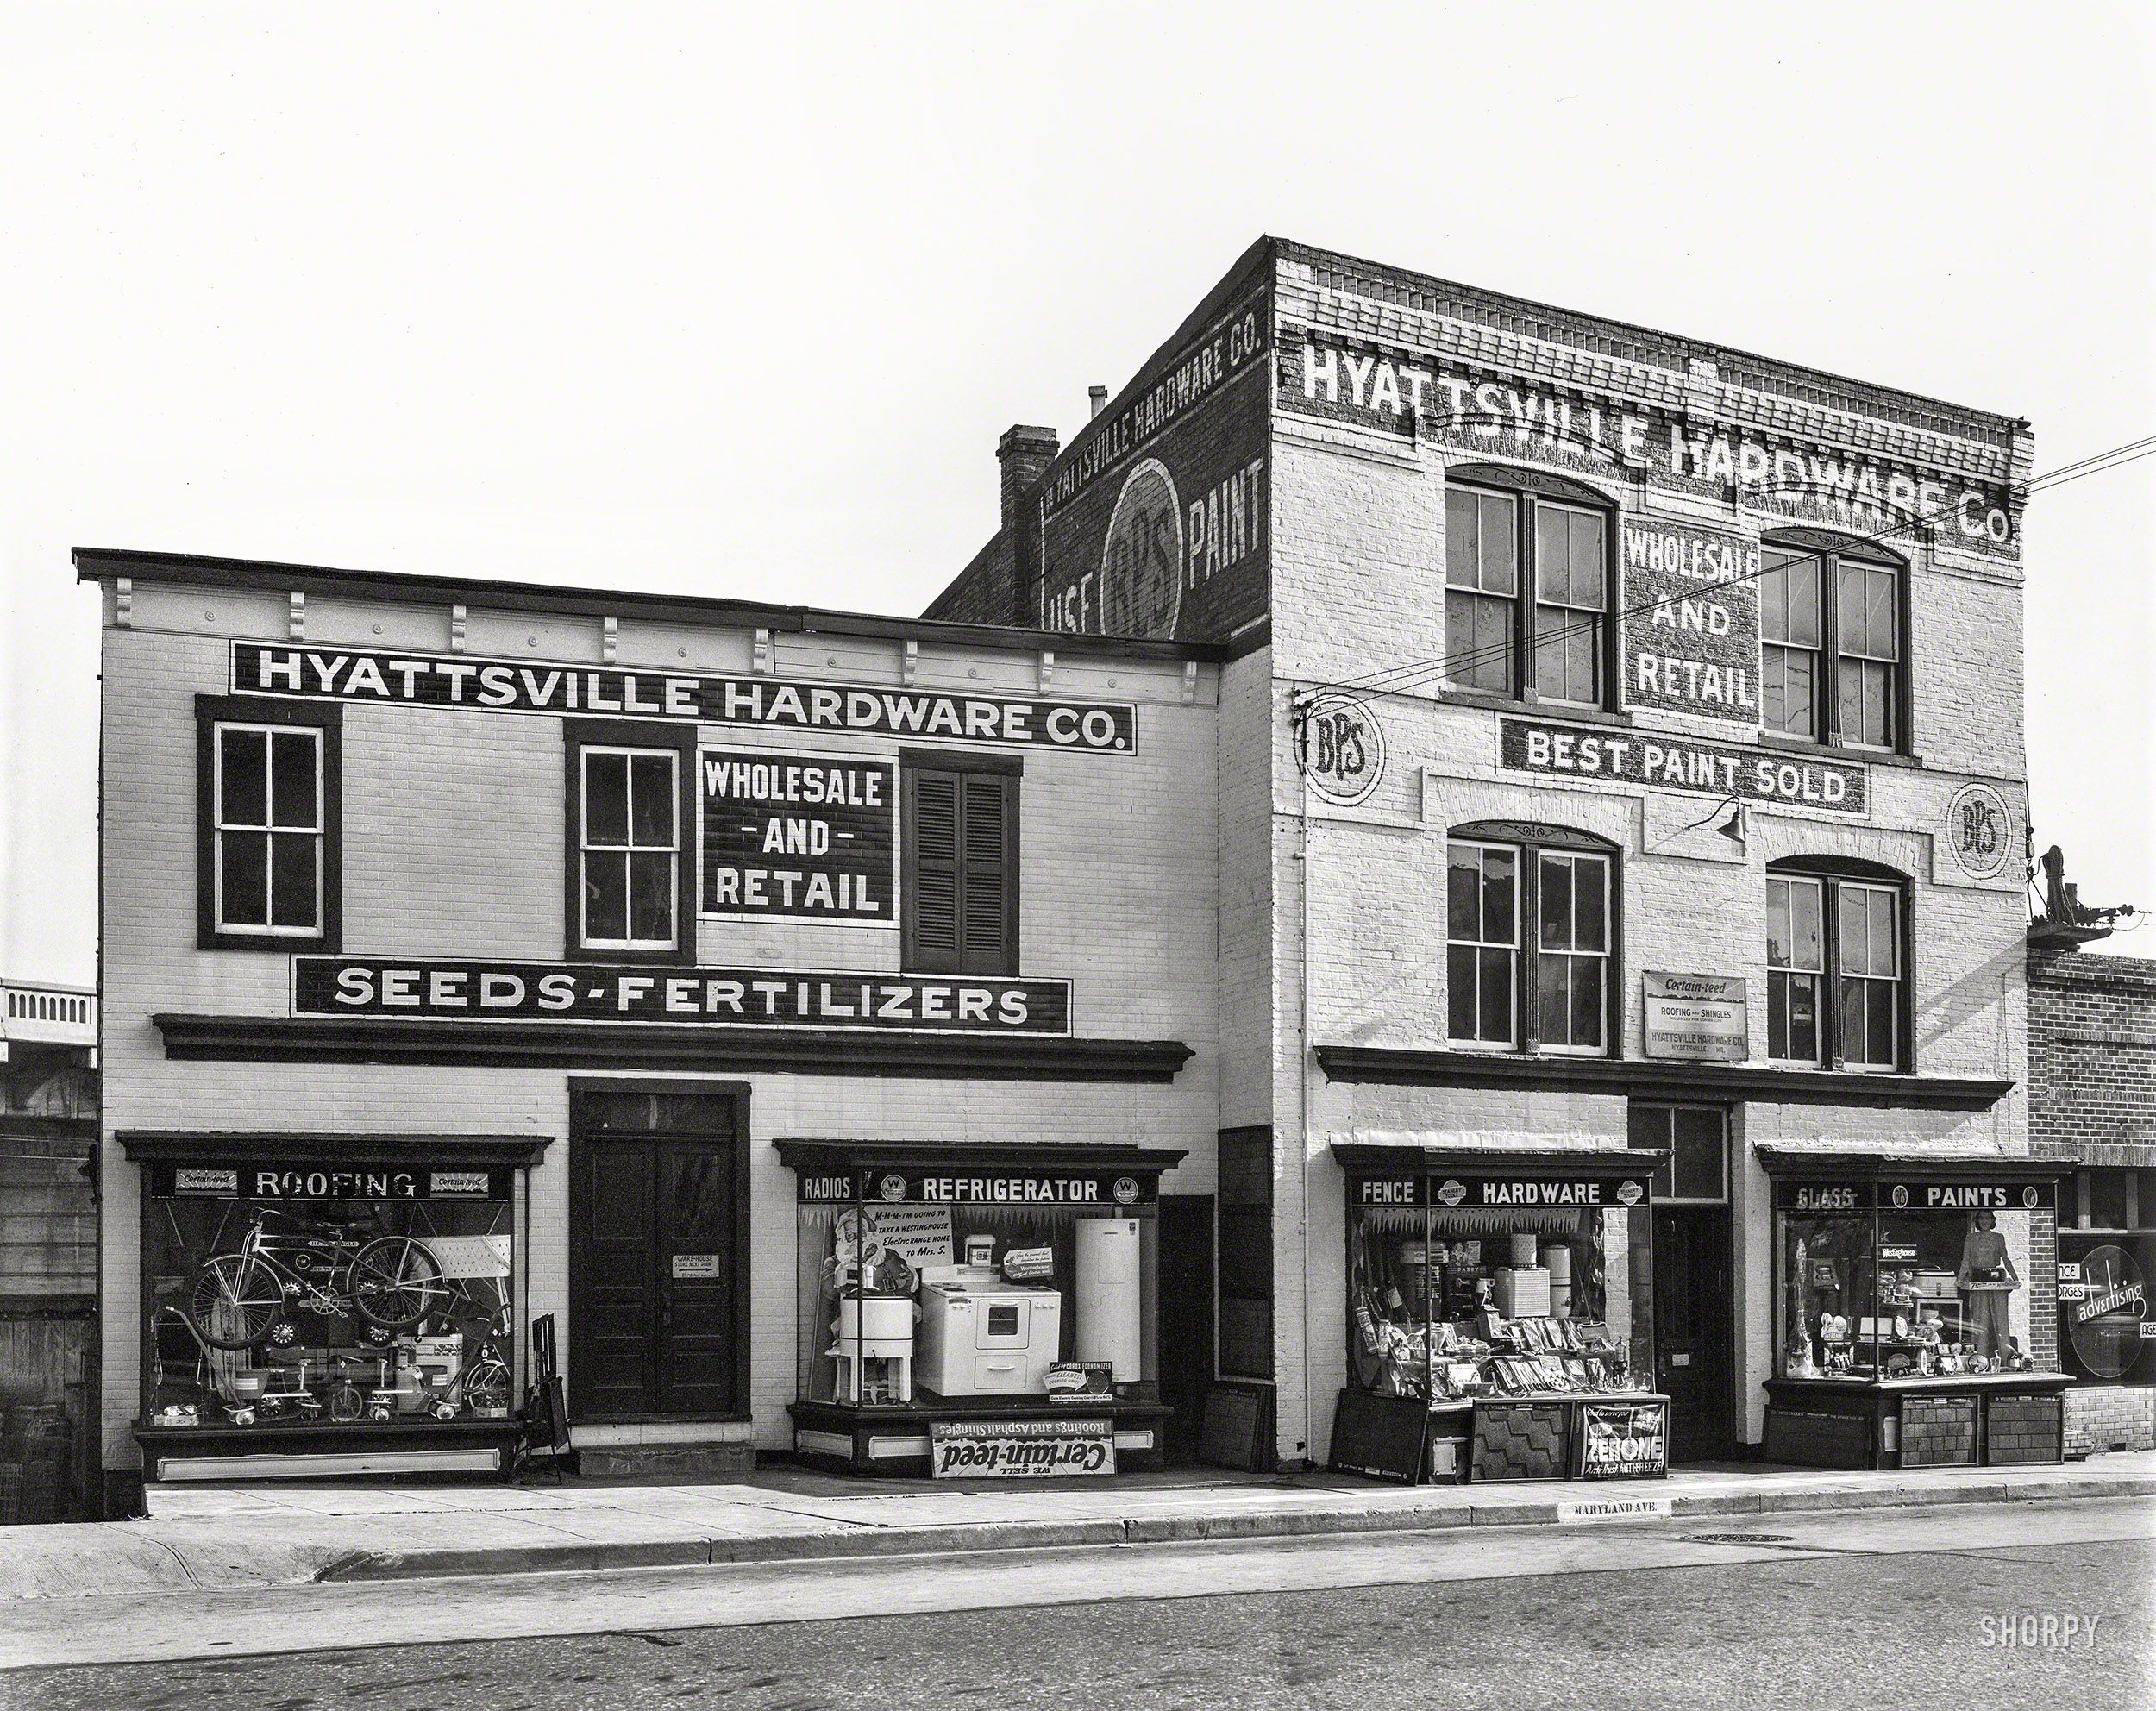 Prince George's County, Maryland, circa 1940. "Electric Institute of Washington, Potomac Electric Power Co. Stores of electric dealers. Hyattsville Hardware." 8x10 inch acetate negative by Theodor Horydczak.  View full size.